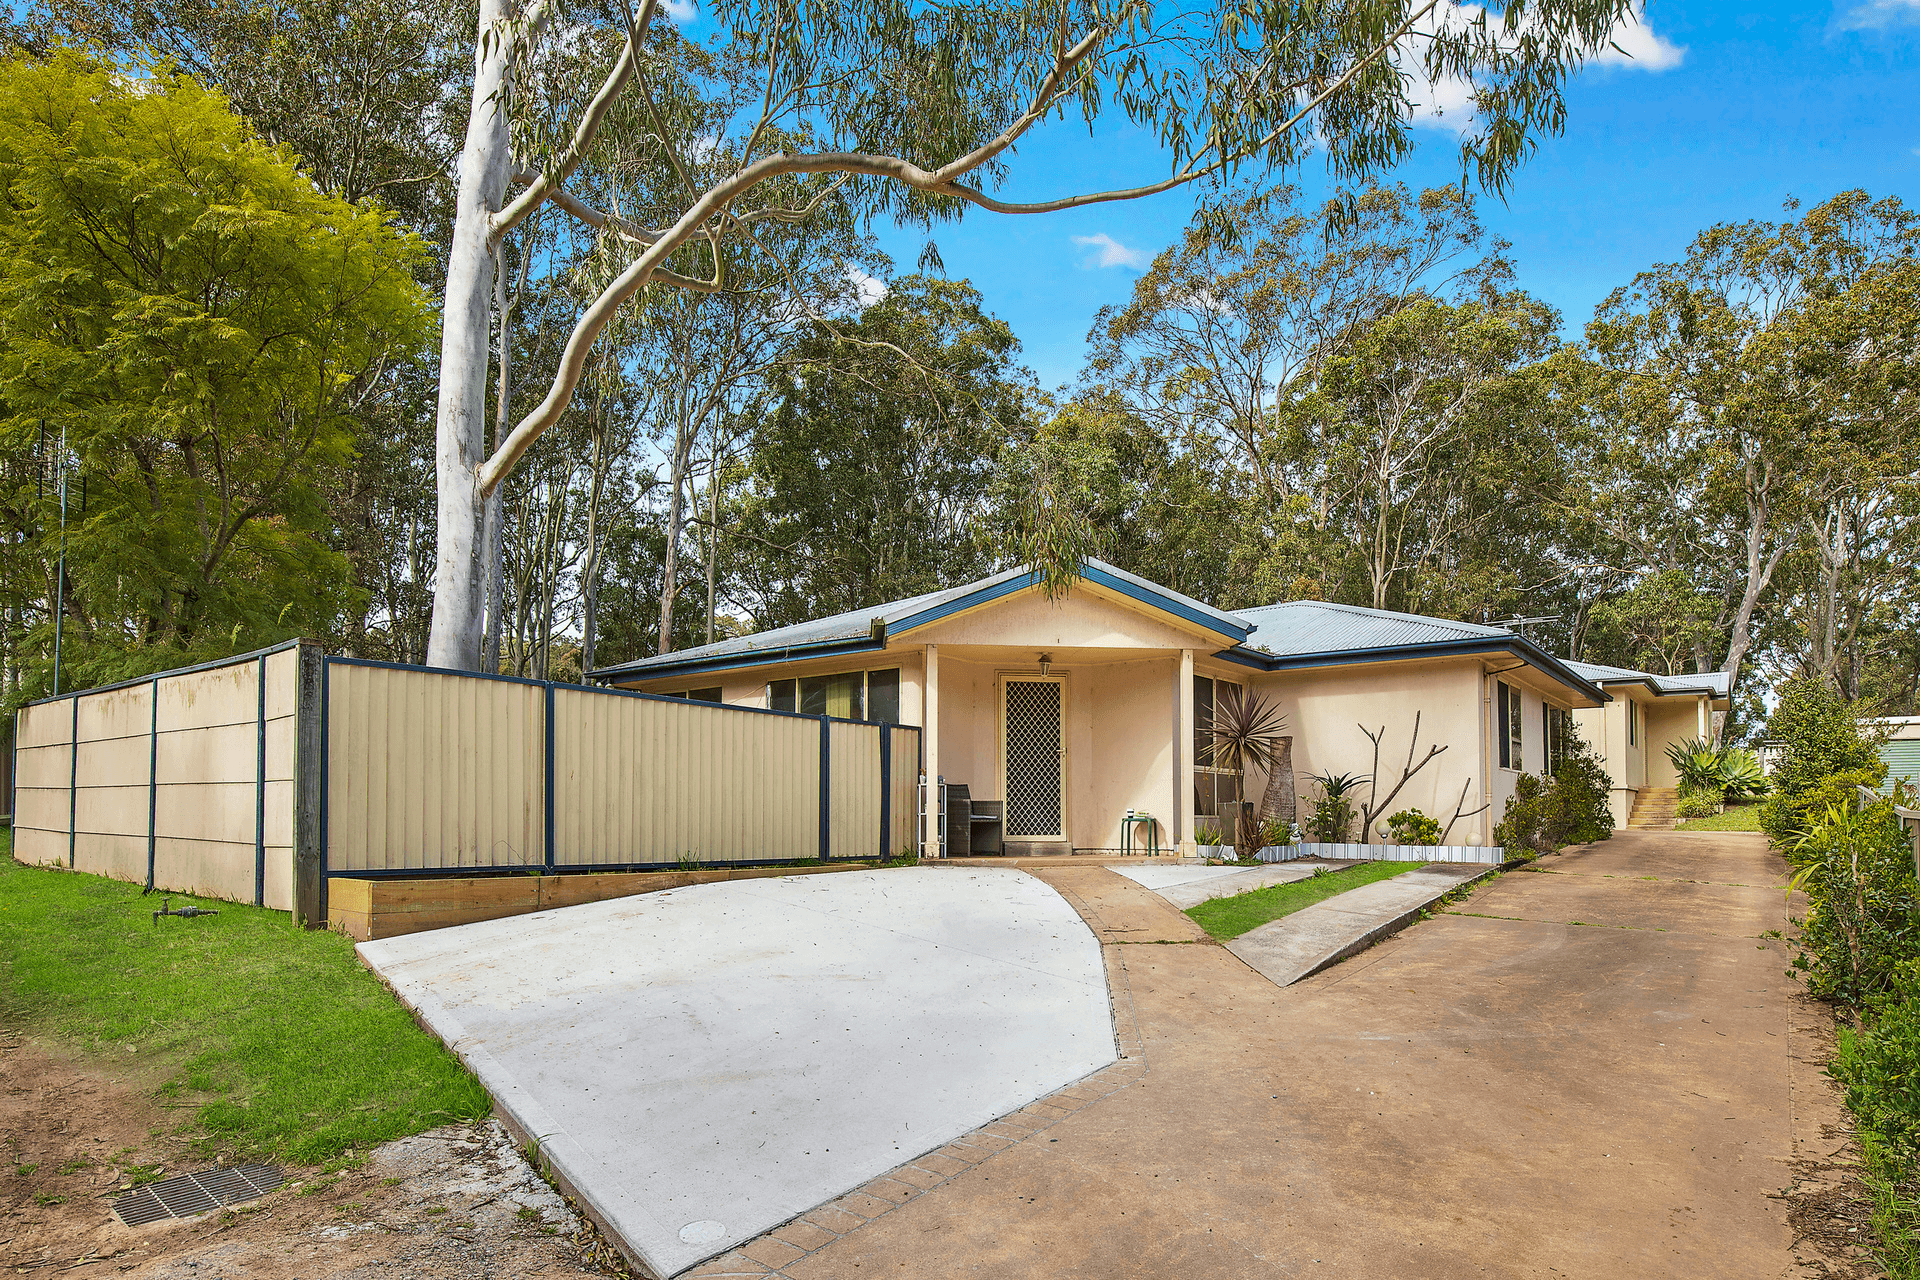 433 Pacific Highway, Wyong, NSW 2259